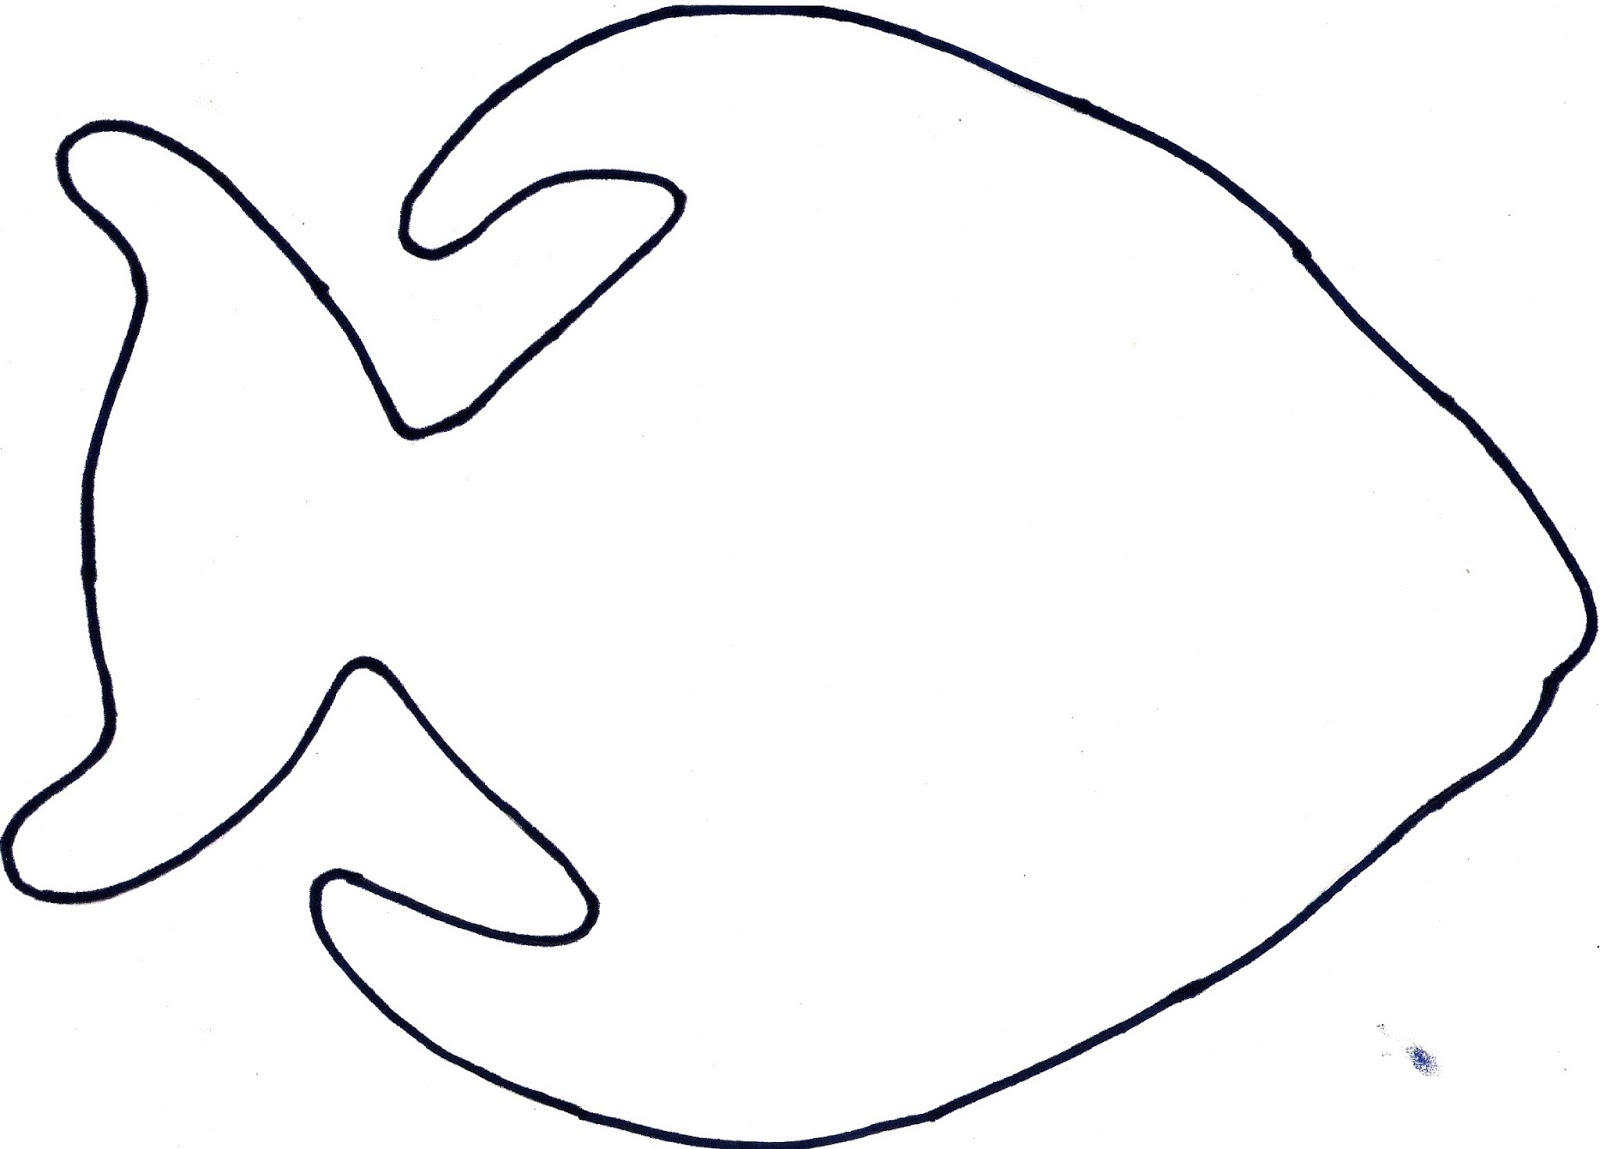 Simple Fish Outline Clip Art - Gallery